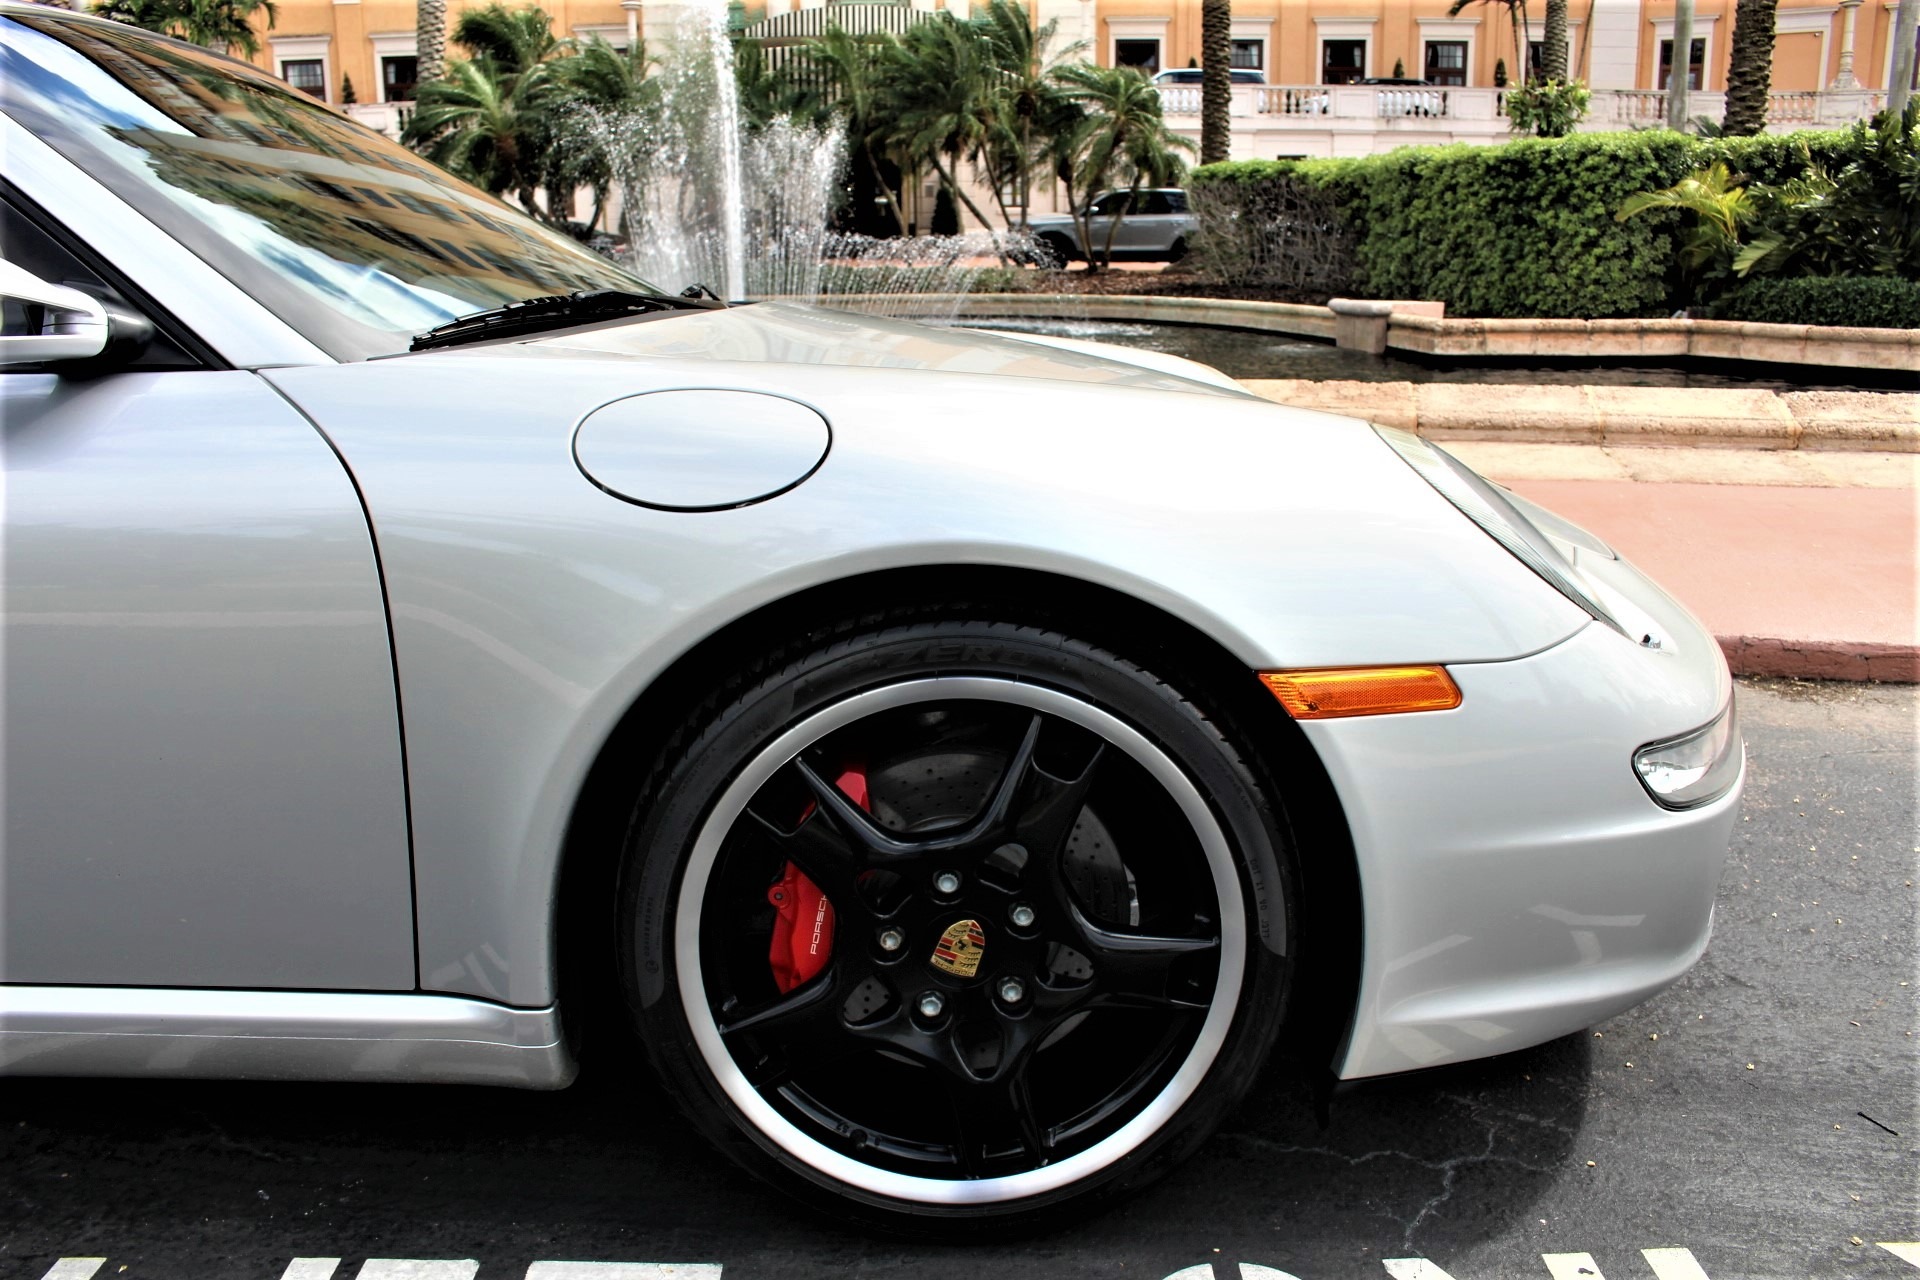 Used 2006 Porsche 911 Carrera S for sale Sold at The Gables Sports Cars in Miami FL 33146 4